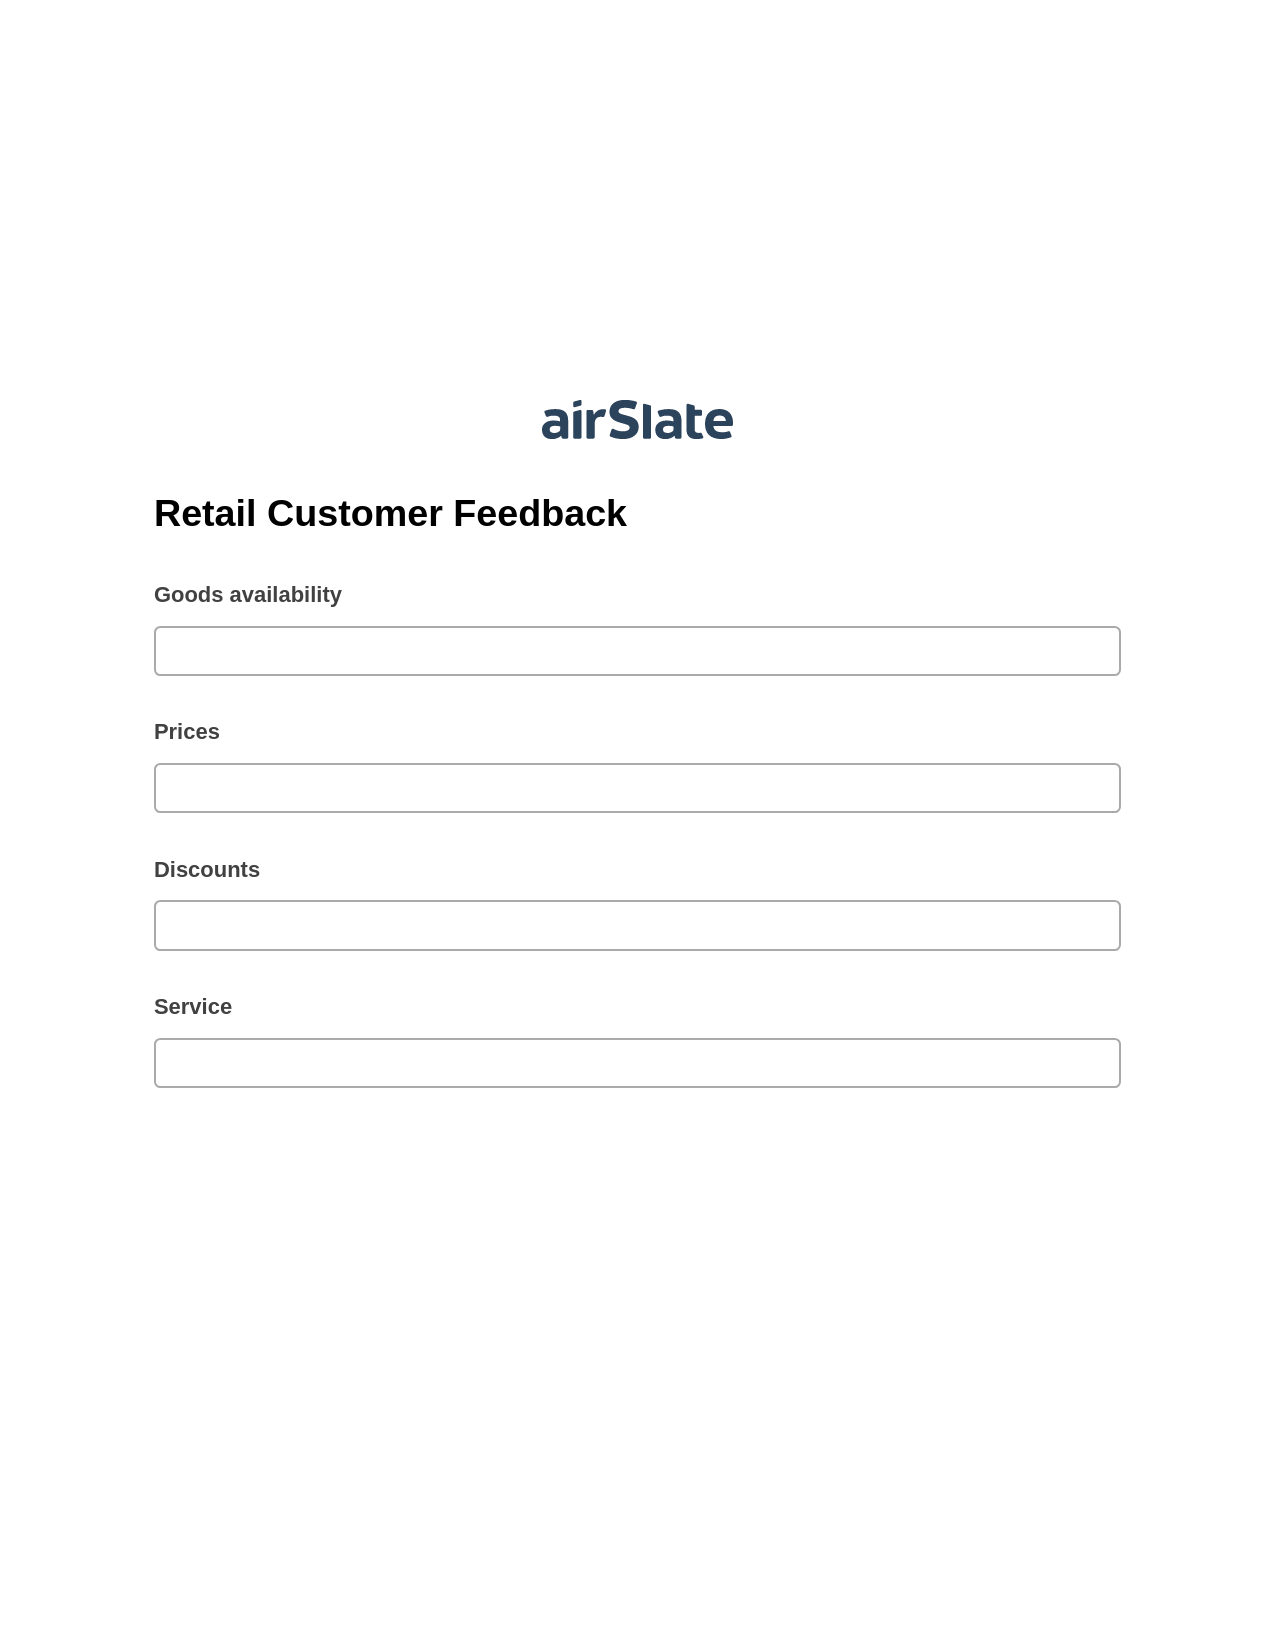 Multirole Retail Customer Feedback Pre-fill from Google Sheets Bot, Update NetSuite Records Bot, Post-finish Document Bot